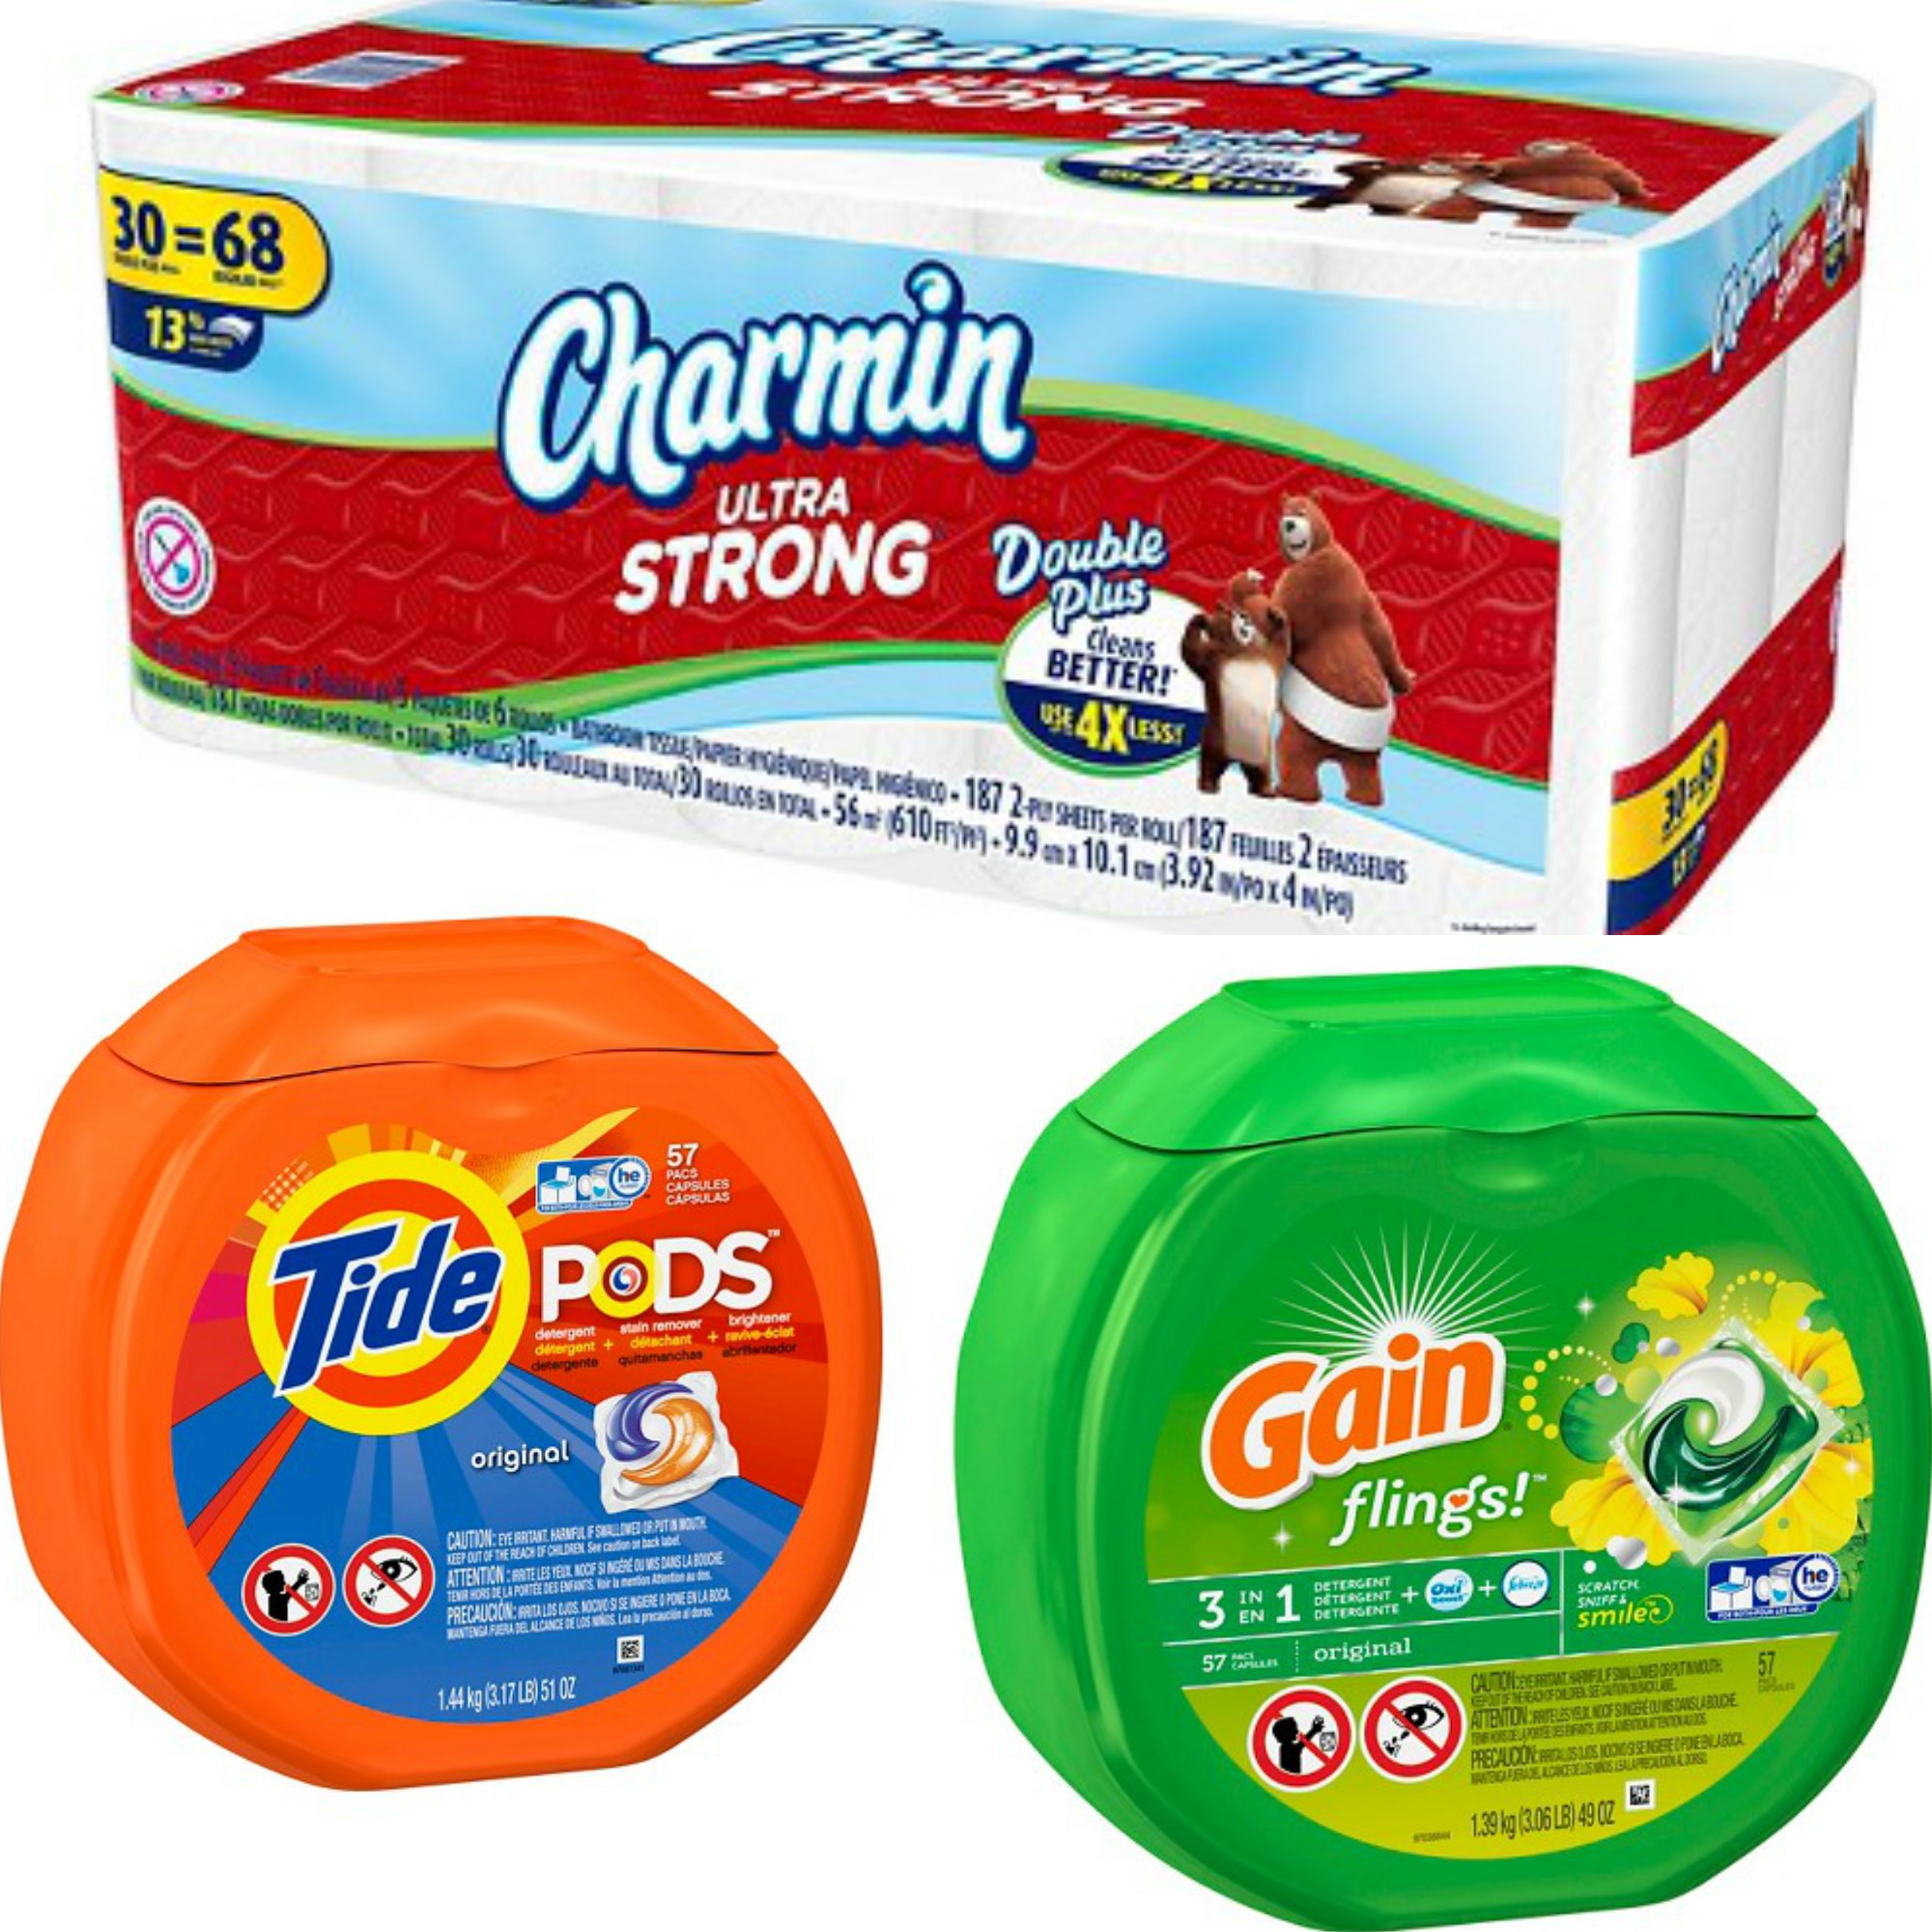 Free $5 Gift Card When You Buy 2 Household Essentials @ Target.com